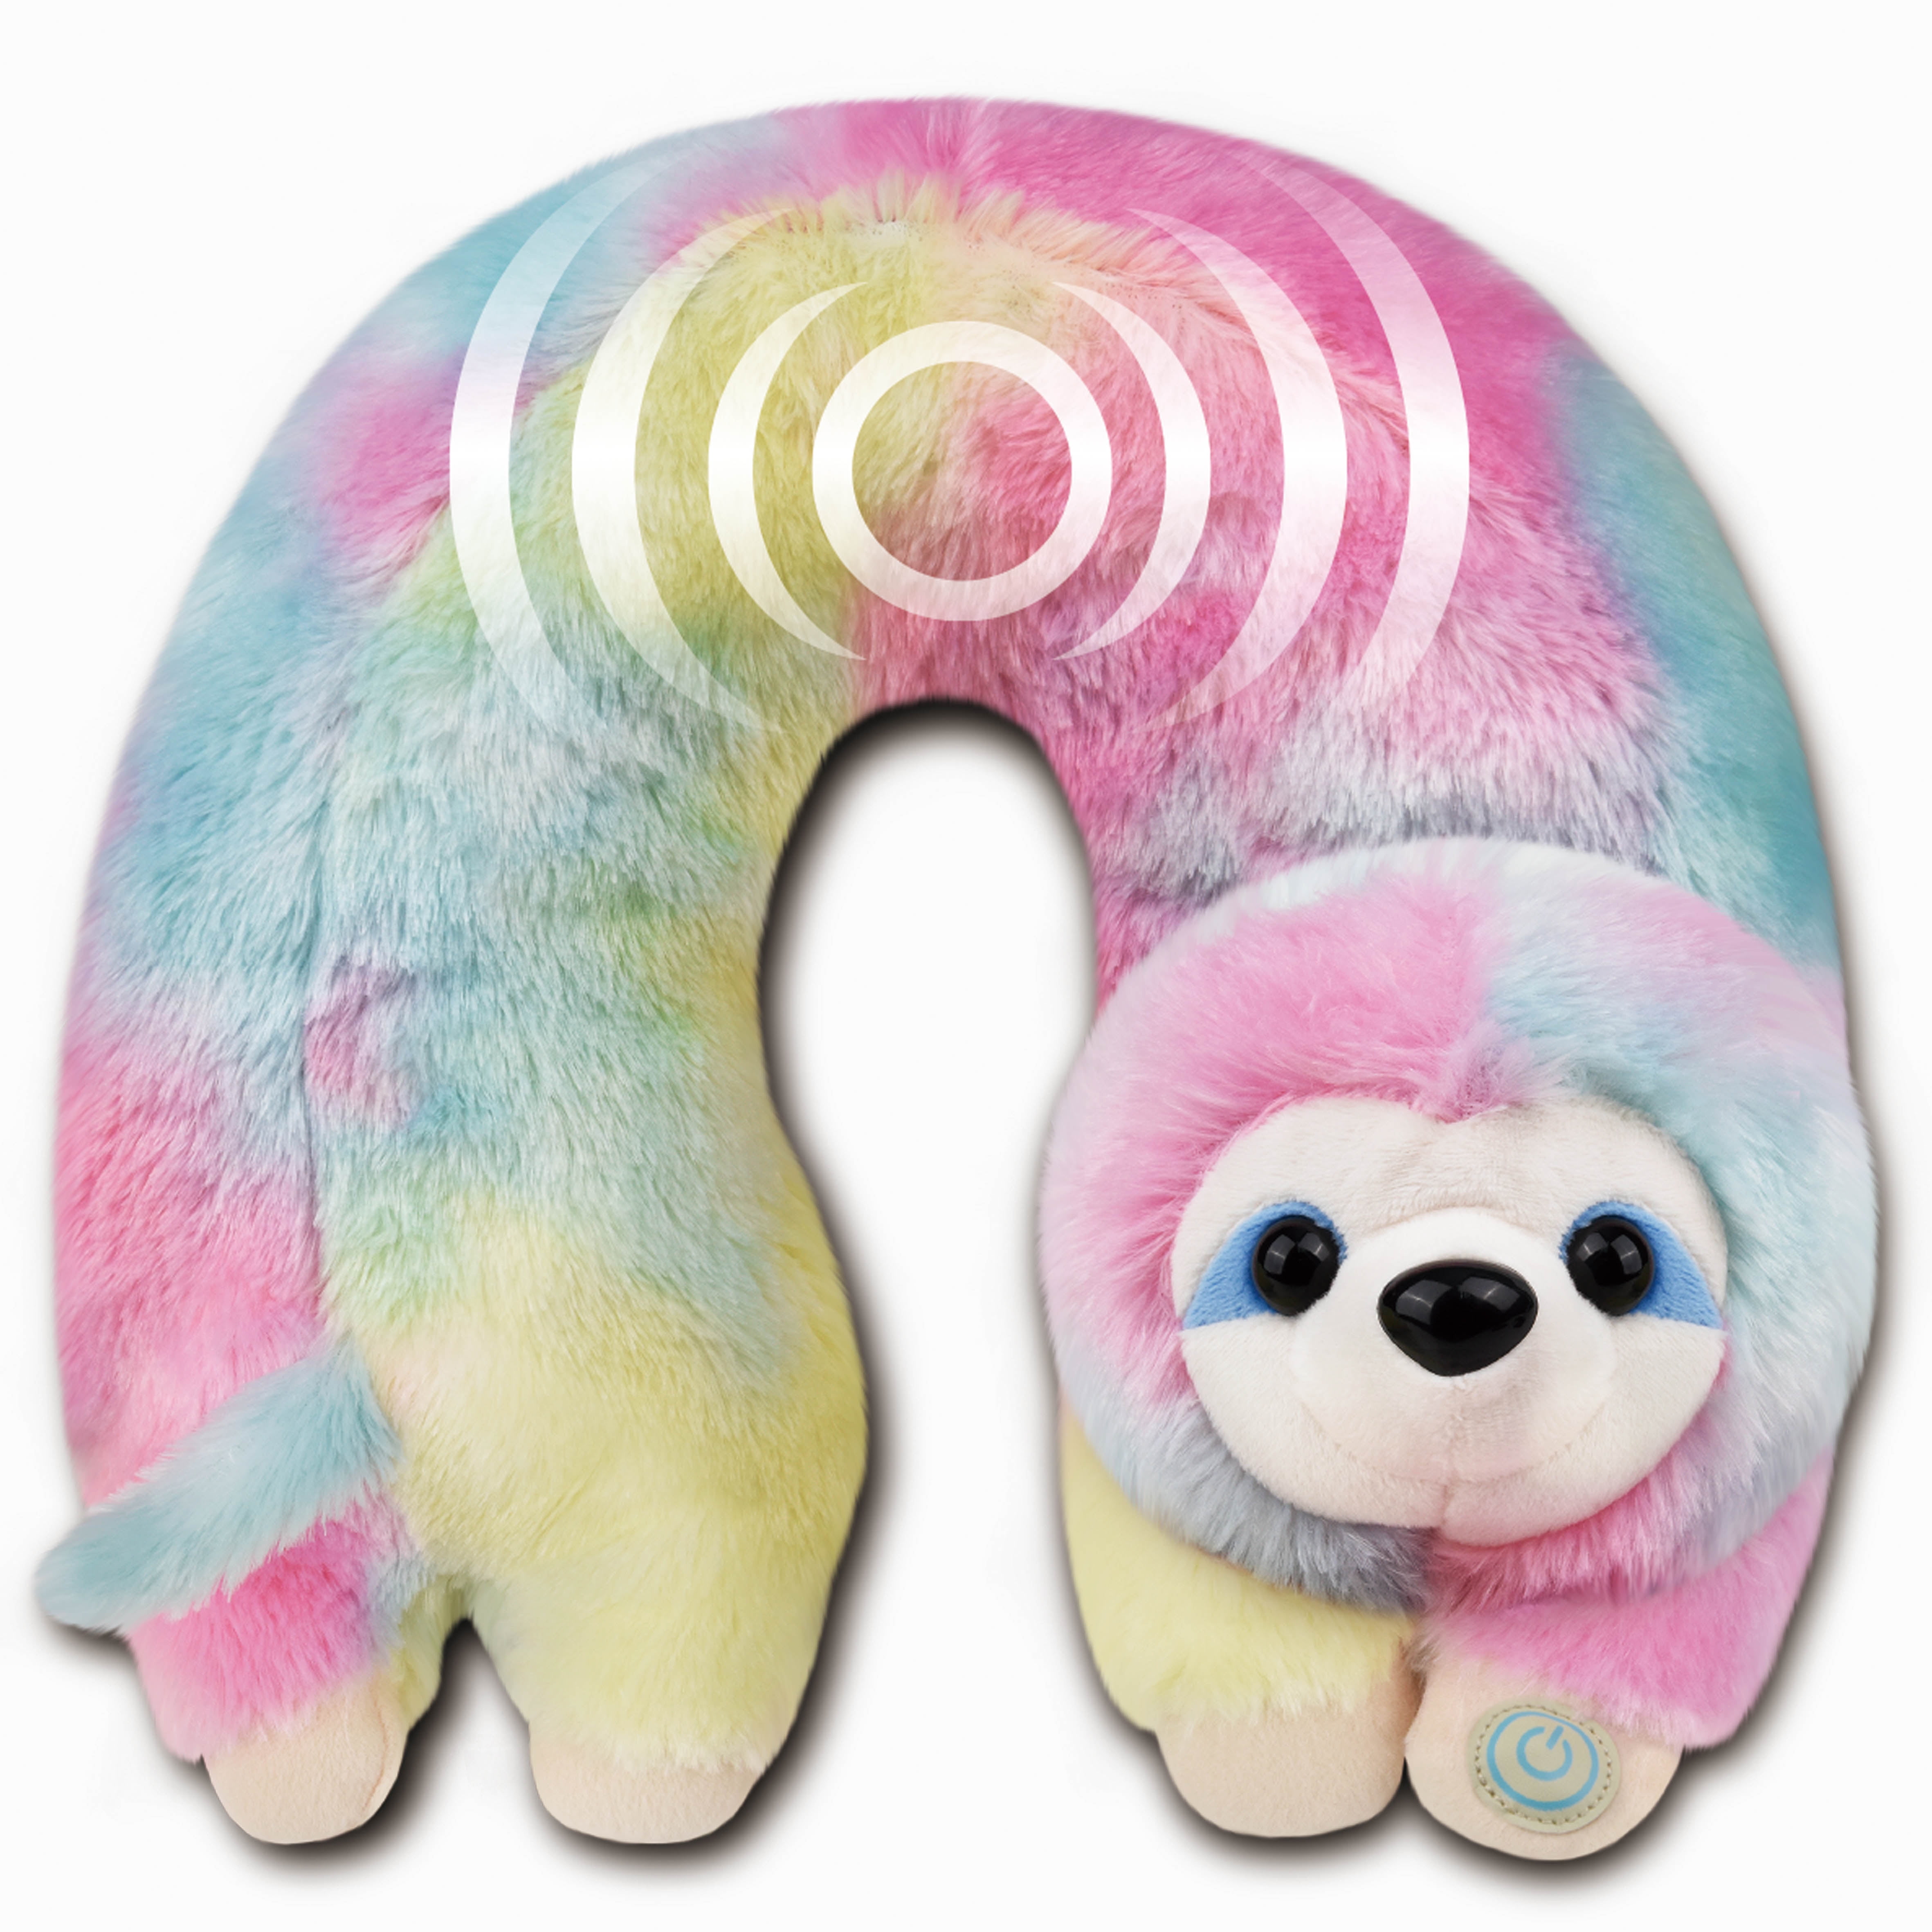 Health Touch Neck Massaging Massager Gift with Relaxing Vibration Rainbow Sloth